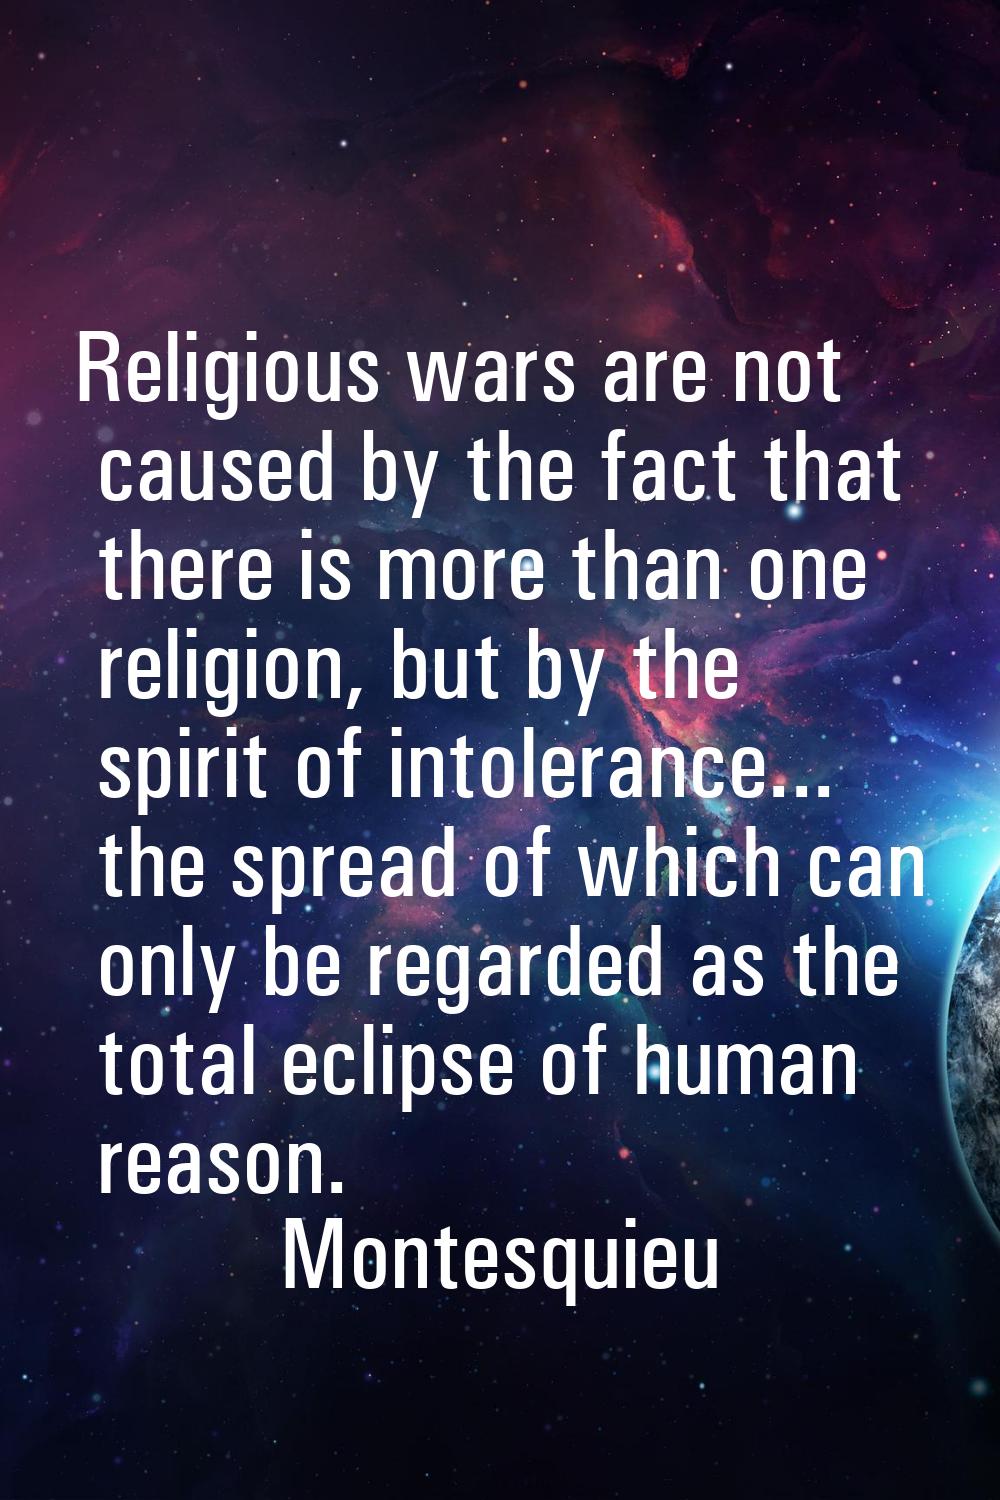 Religious wars are not caused by the fact that there is more than one religion, but by the spirit o